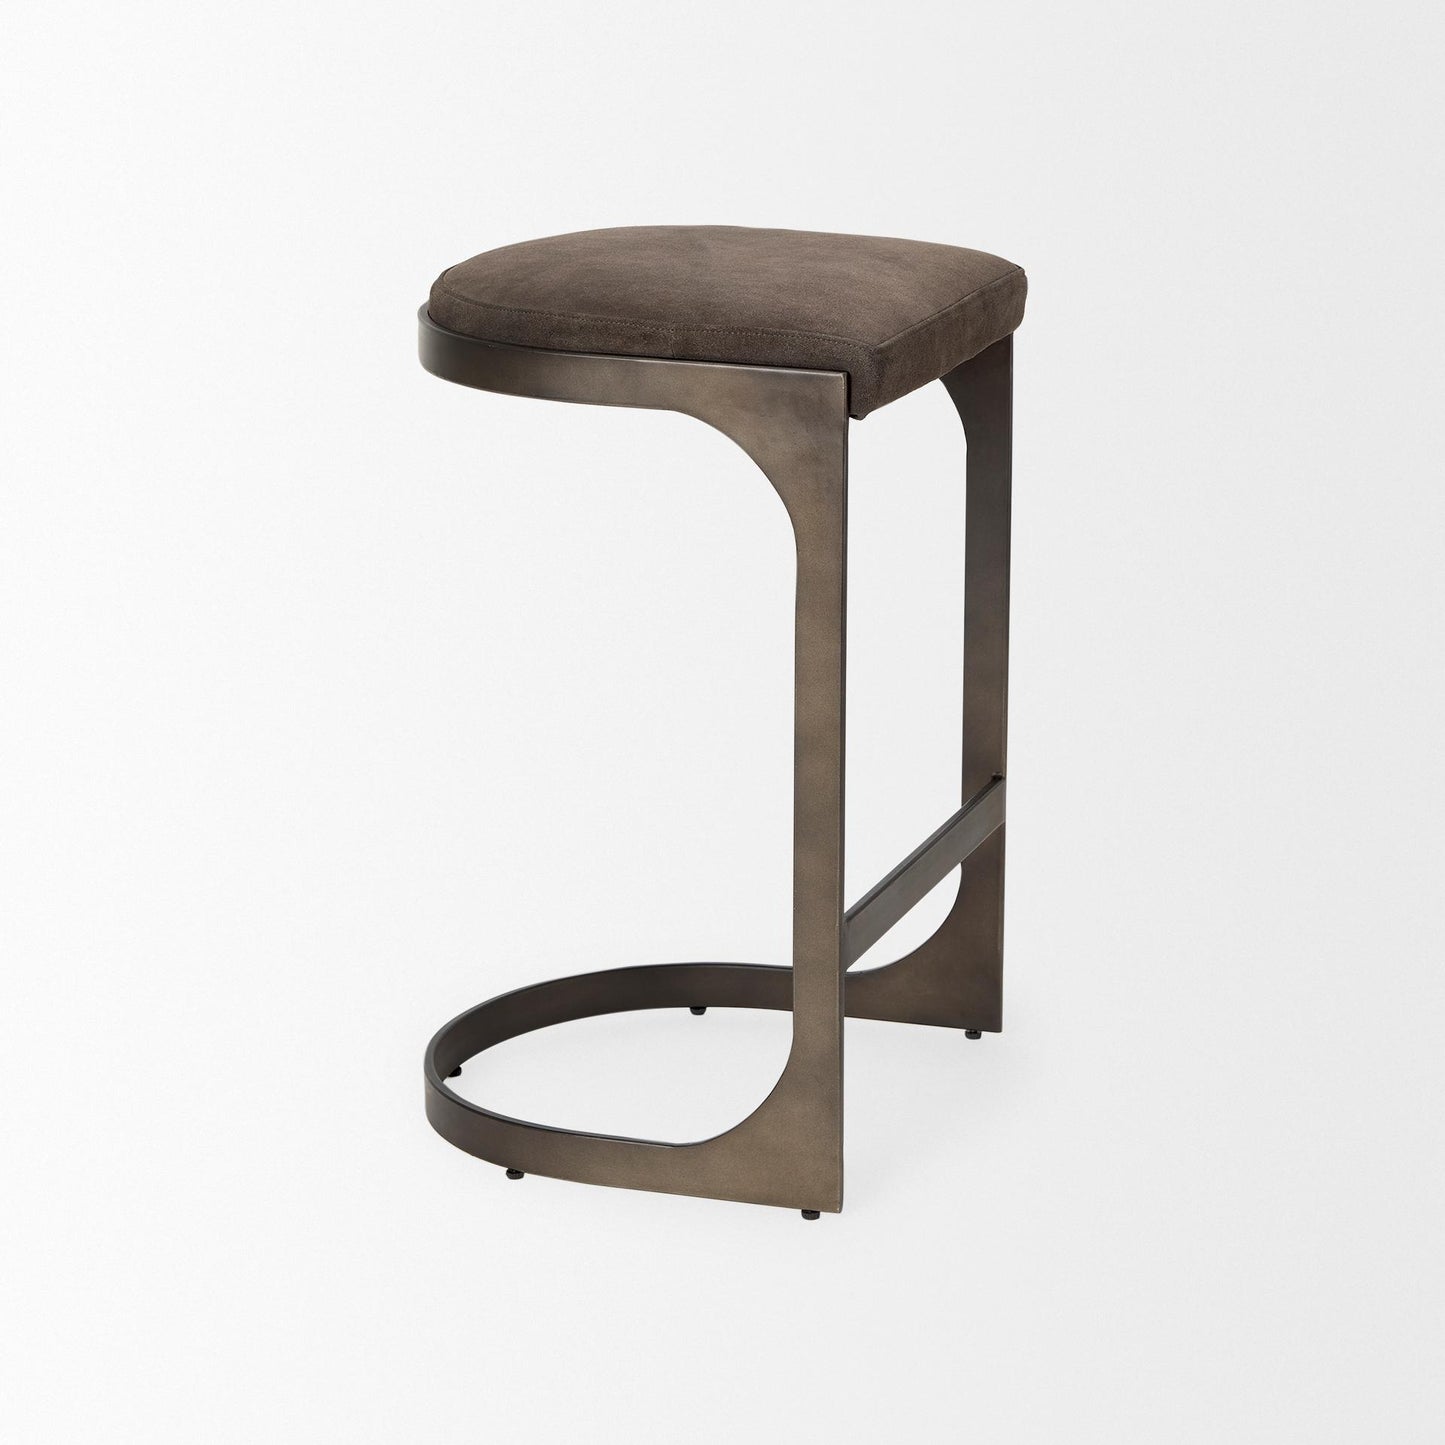 Tyson 17L x 18W x 28H Brown/Gray Suede W/ Metal Frame Counter Stool